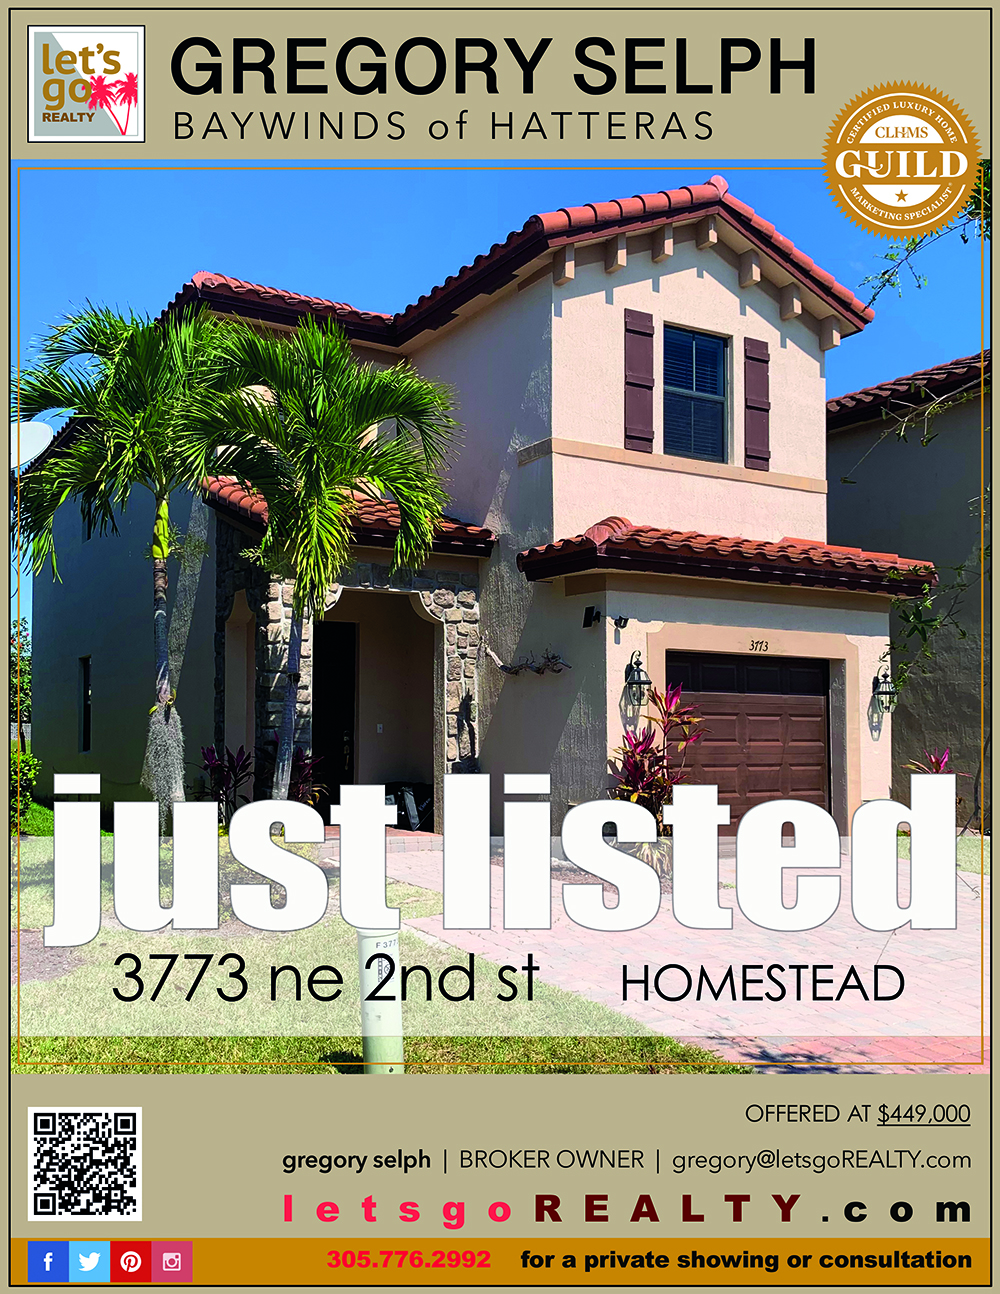 JUST LISTED 3773 Ne 2nd St | Homestead FL 33033 | #justlisted #gregoryselph #letsgorealty